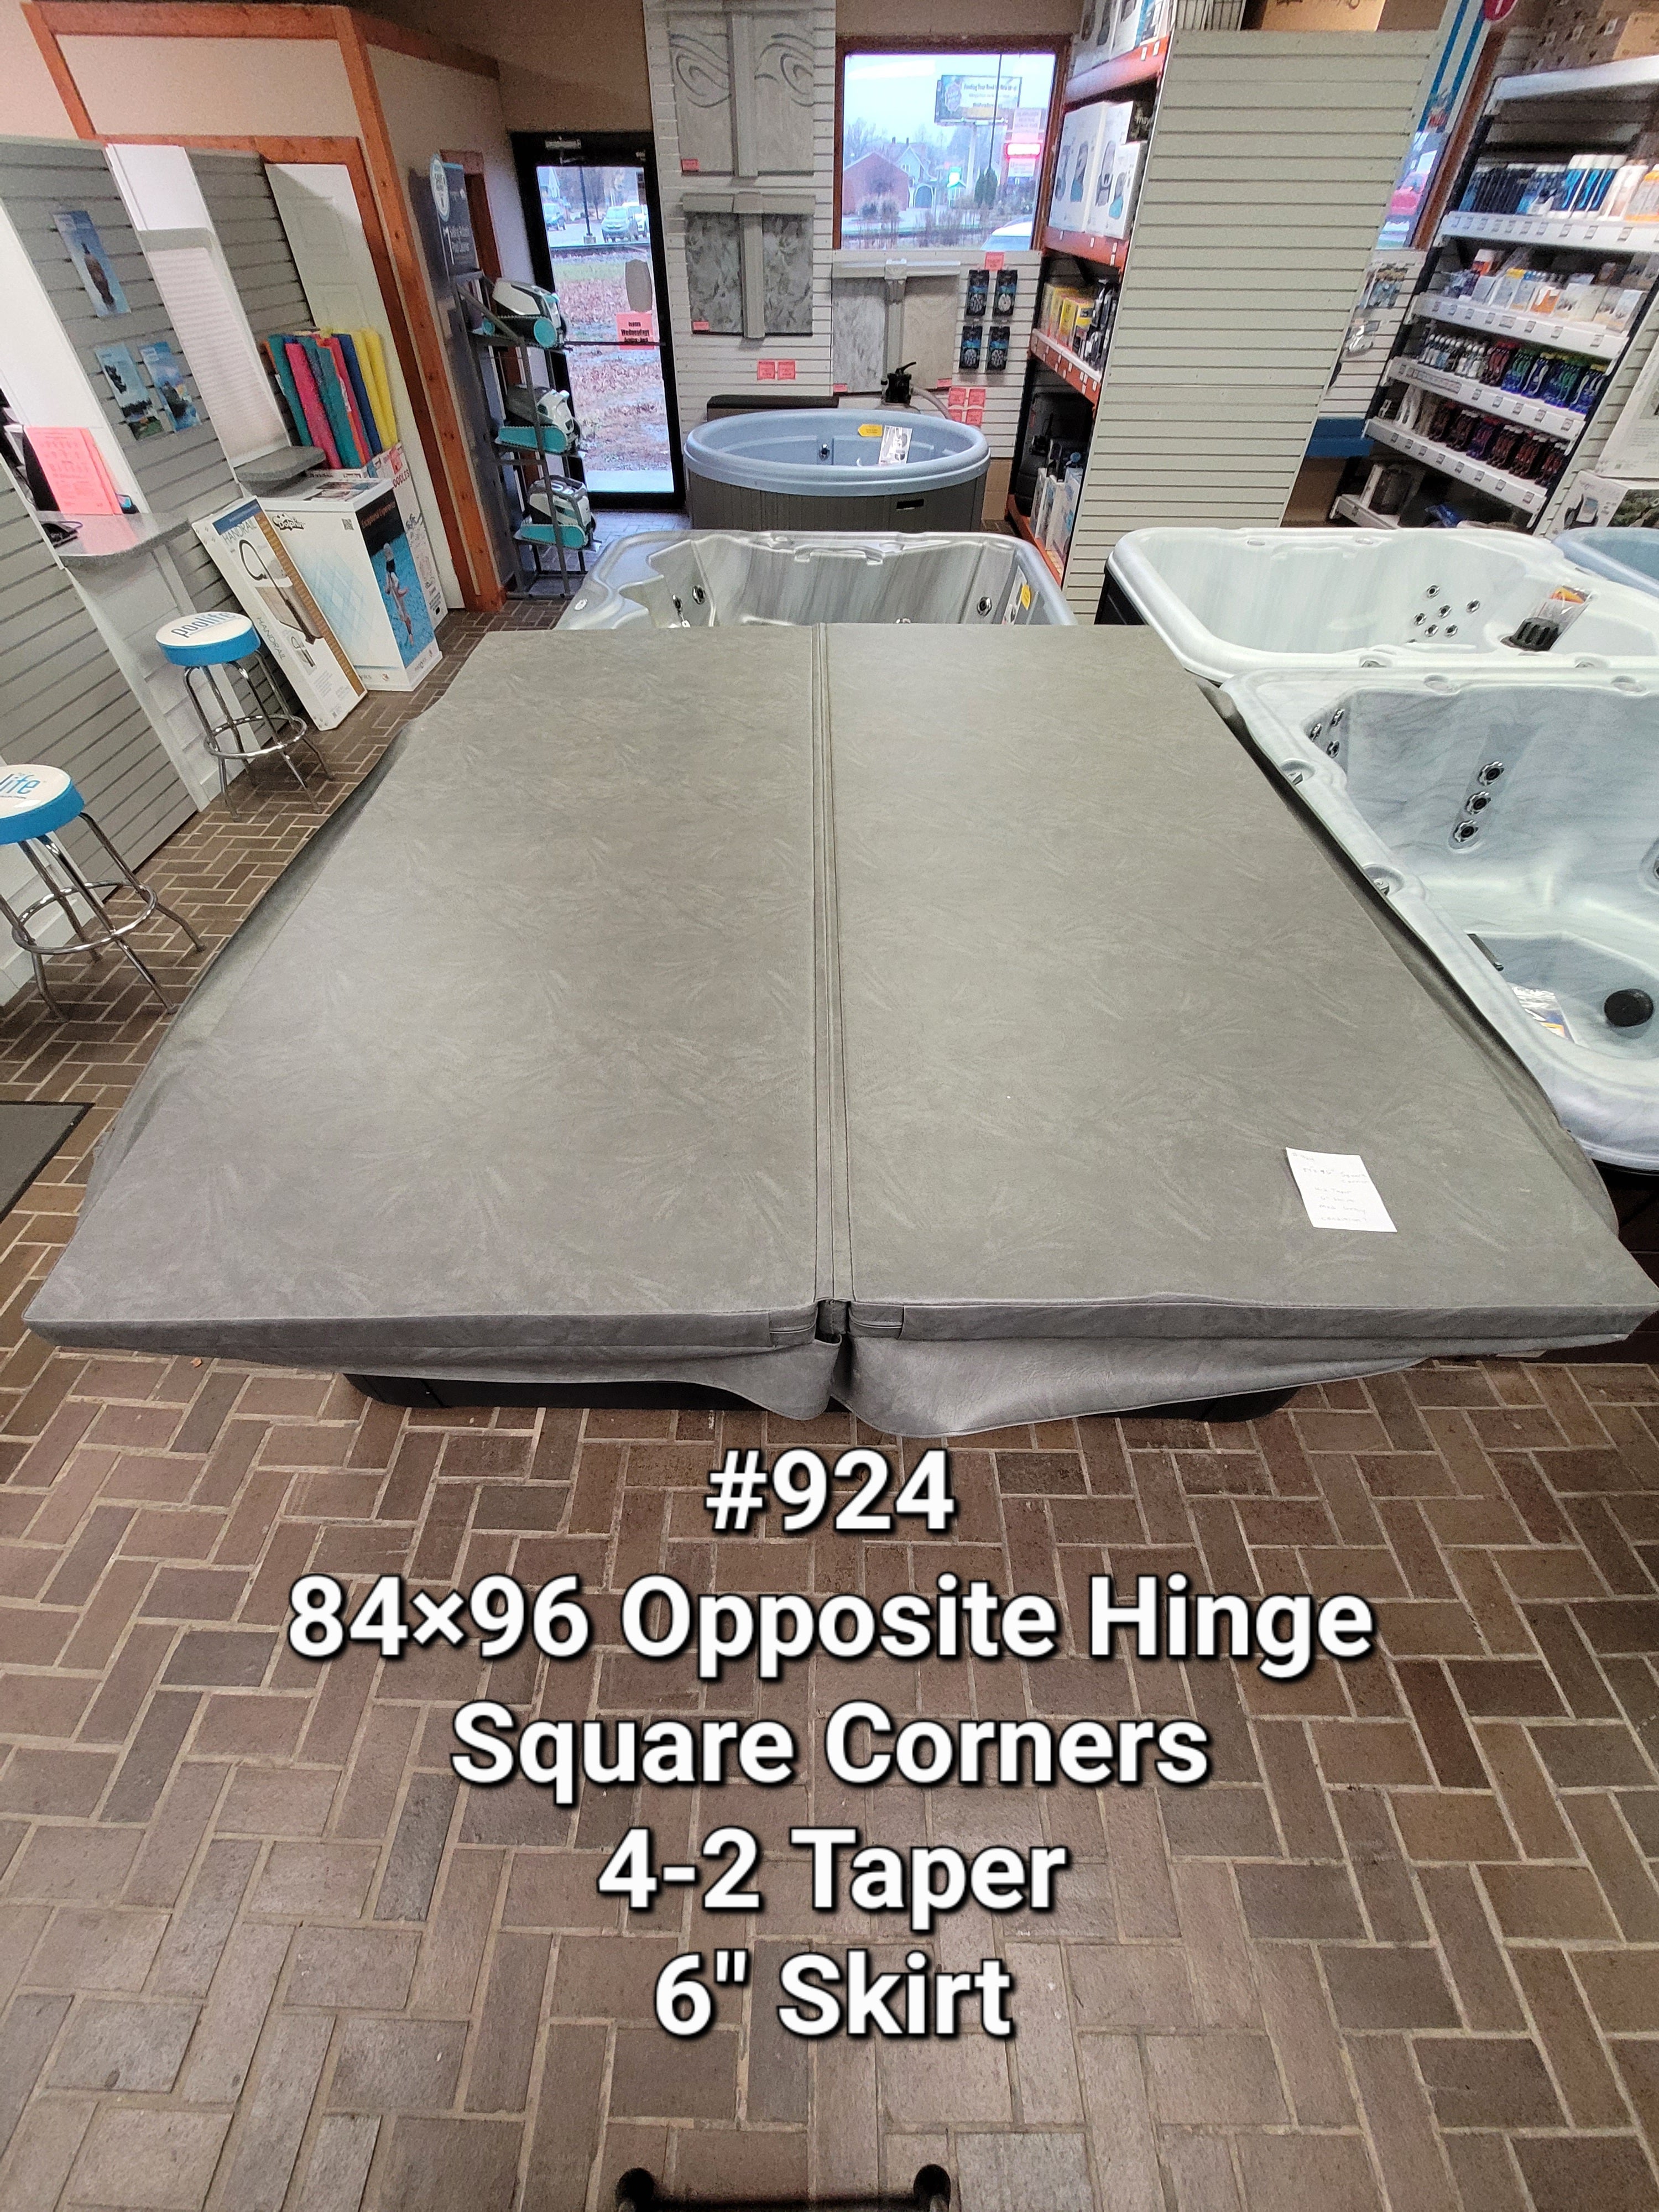 Hot Tub Cover 84x96 Opposite Hinge with Square Corners Gray (Local Pickup ONLY) #924